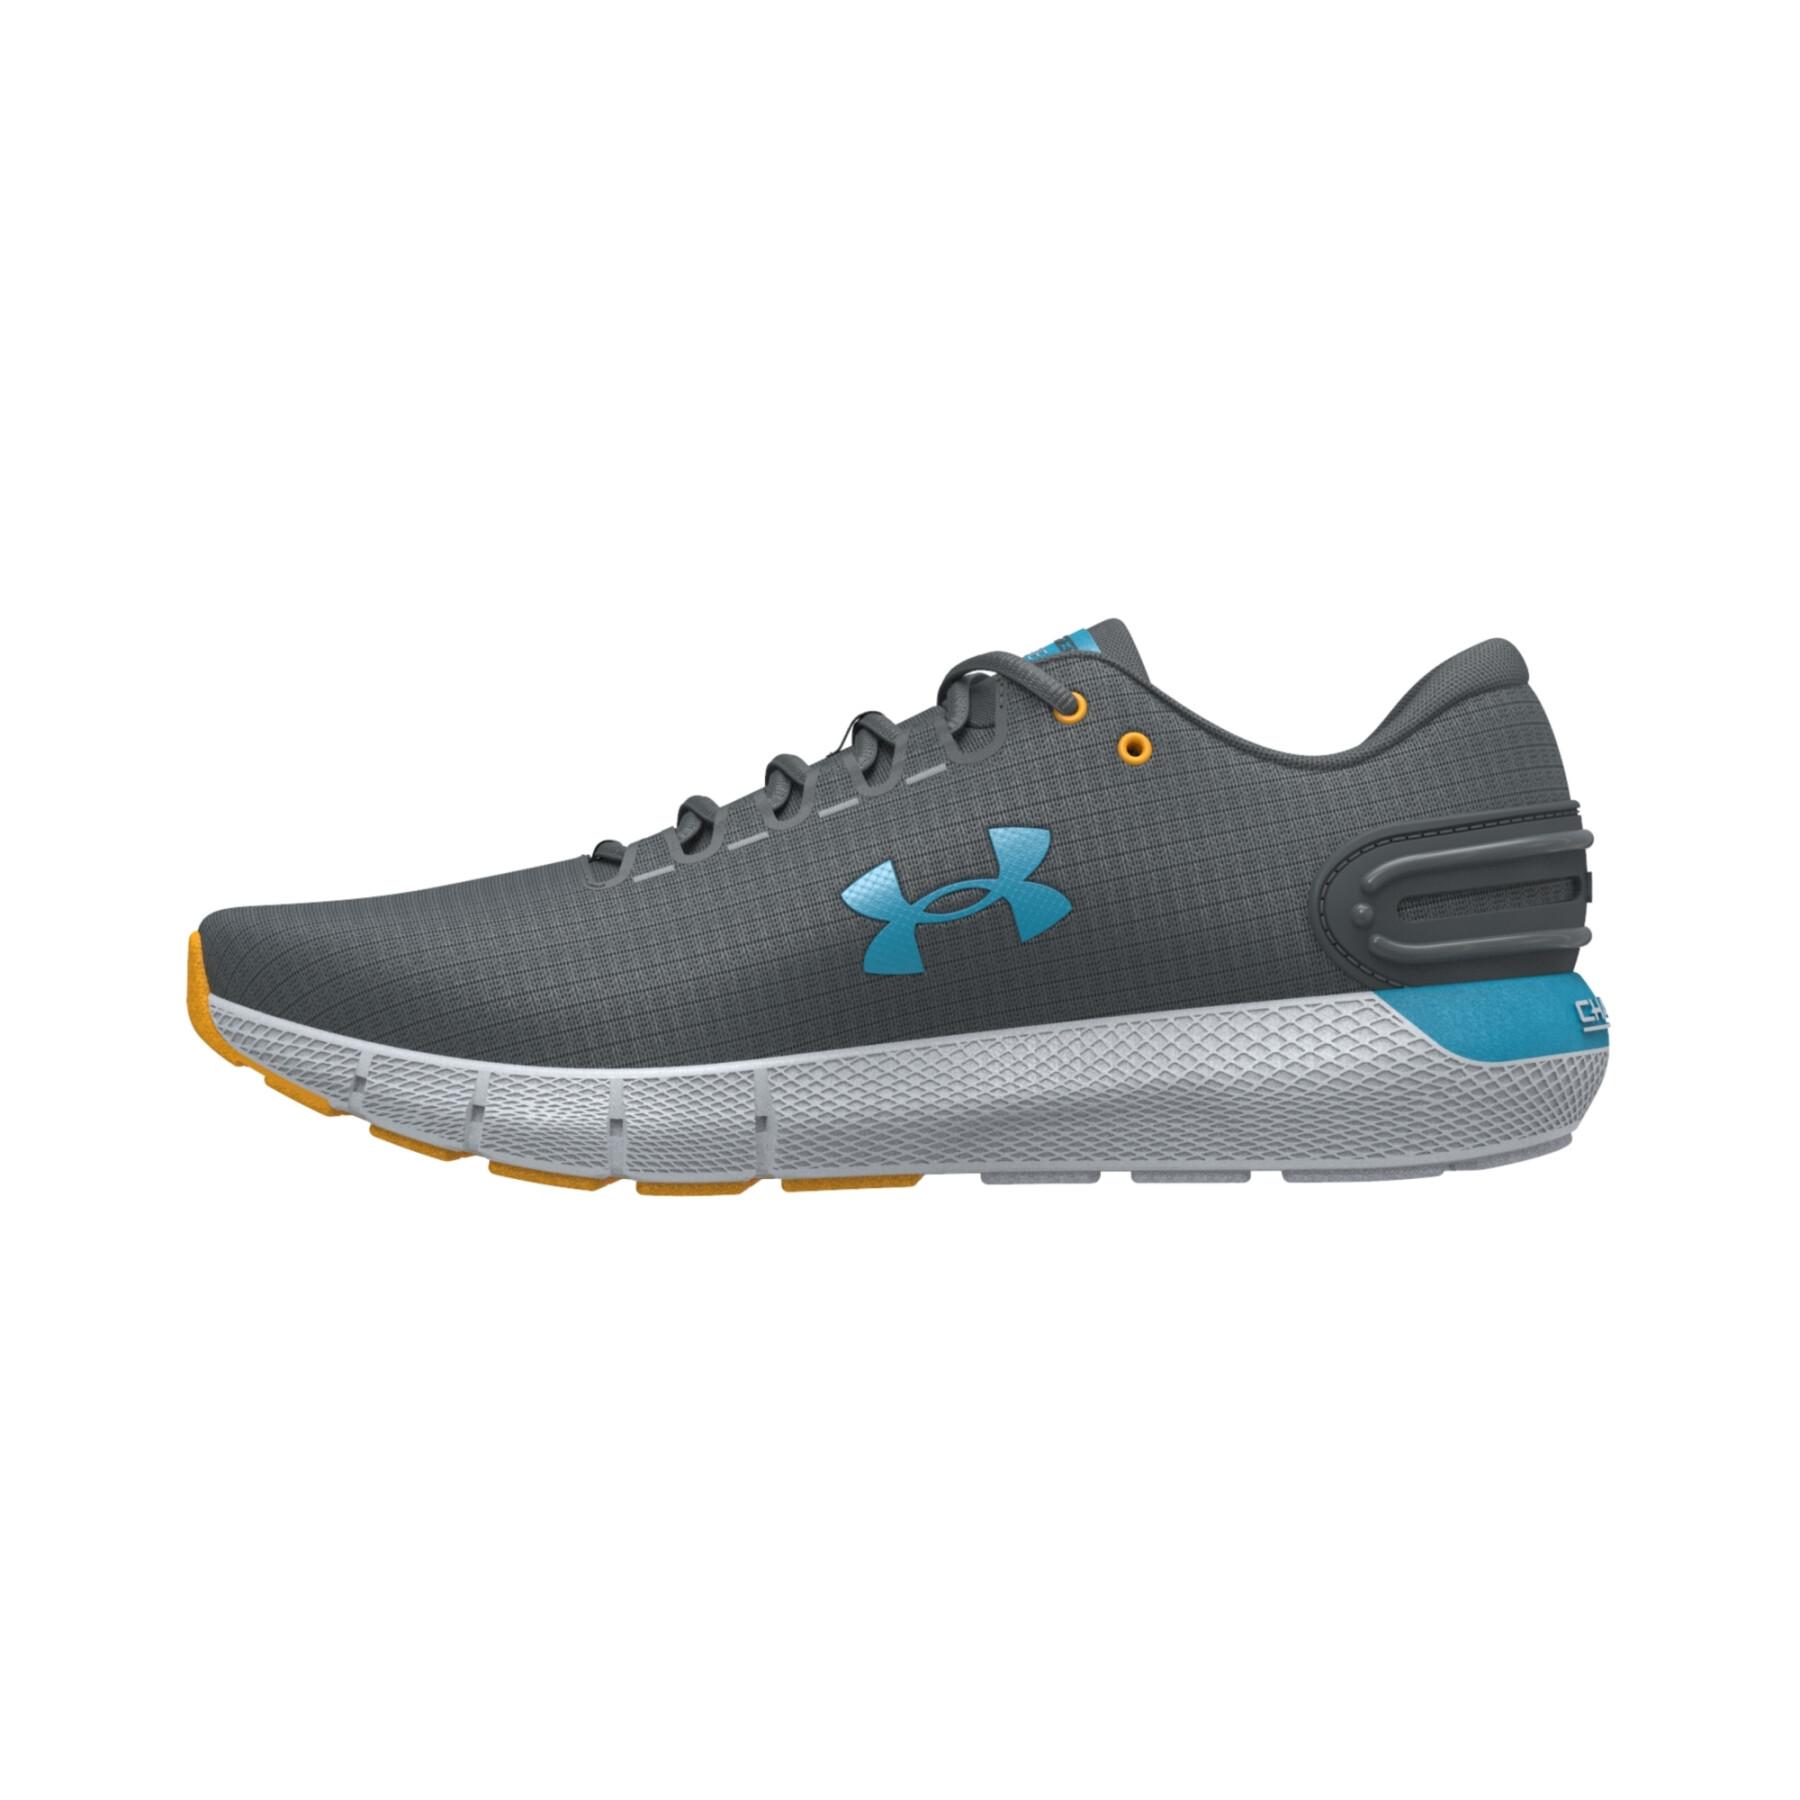 Buty do biegania dla kobiet Under Armour Charged Rogue 2.5 Rip Running